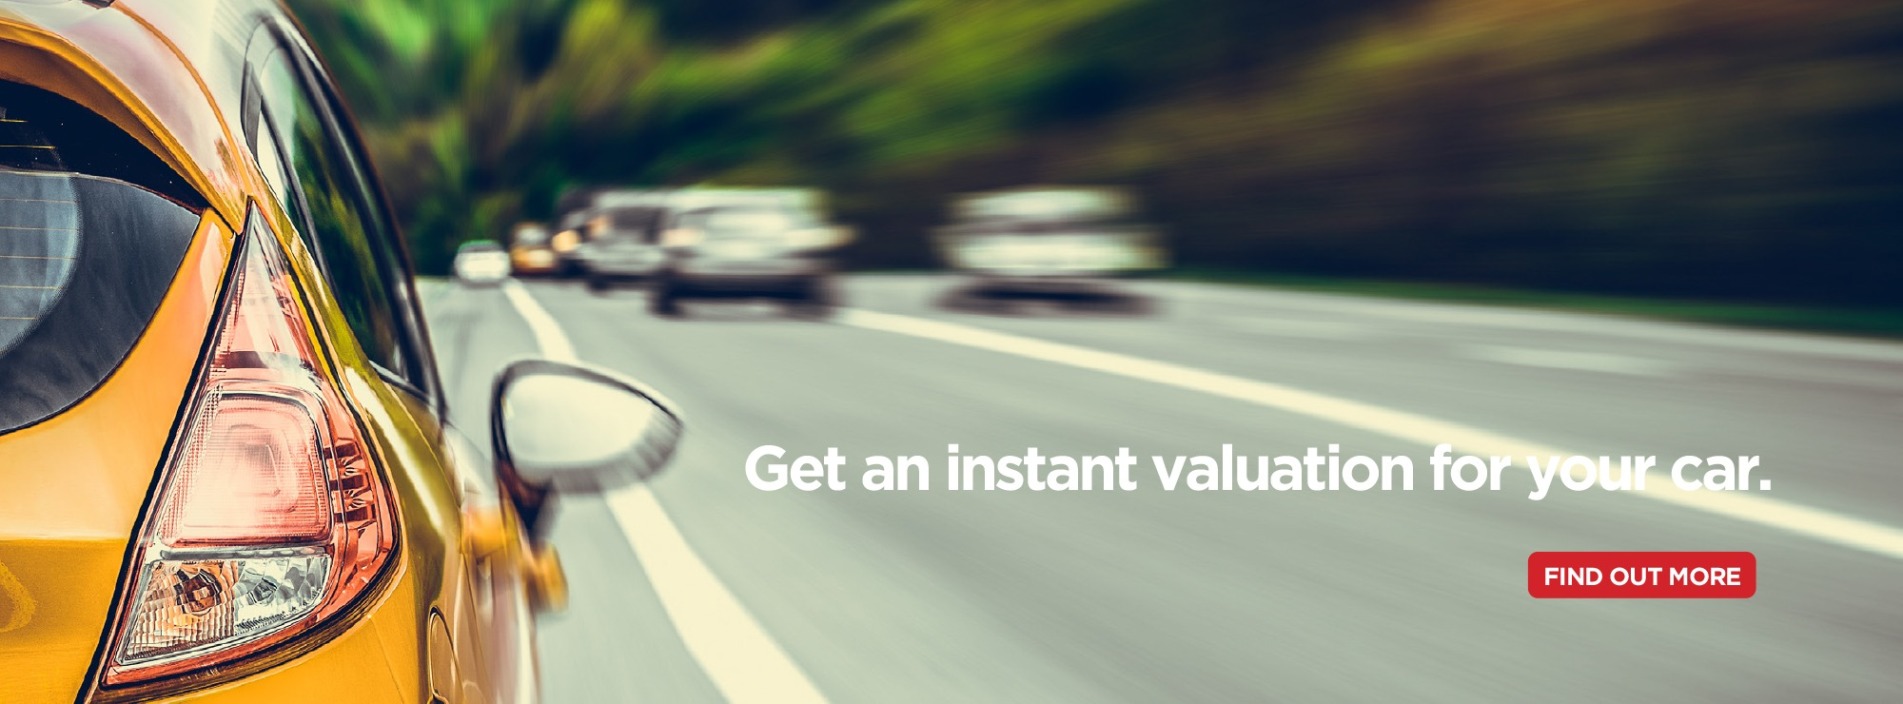 Get an instant valuation on your car